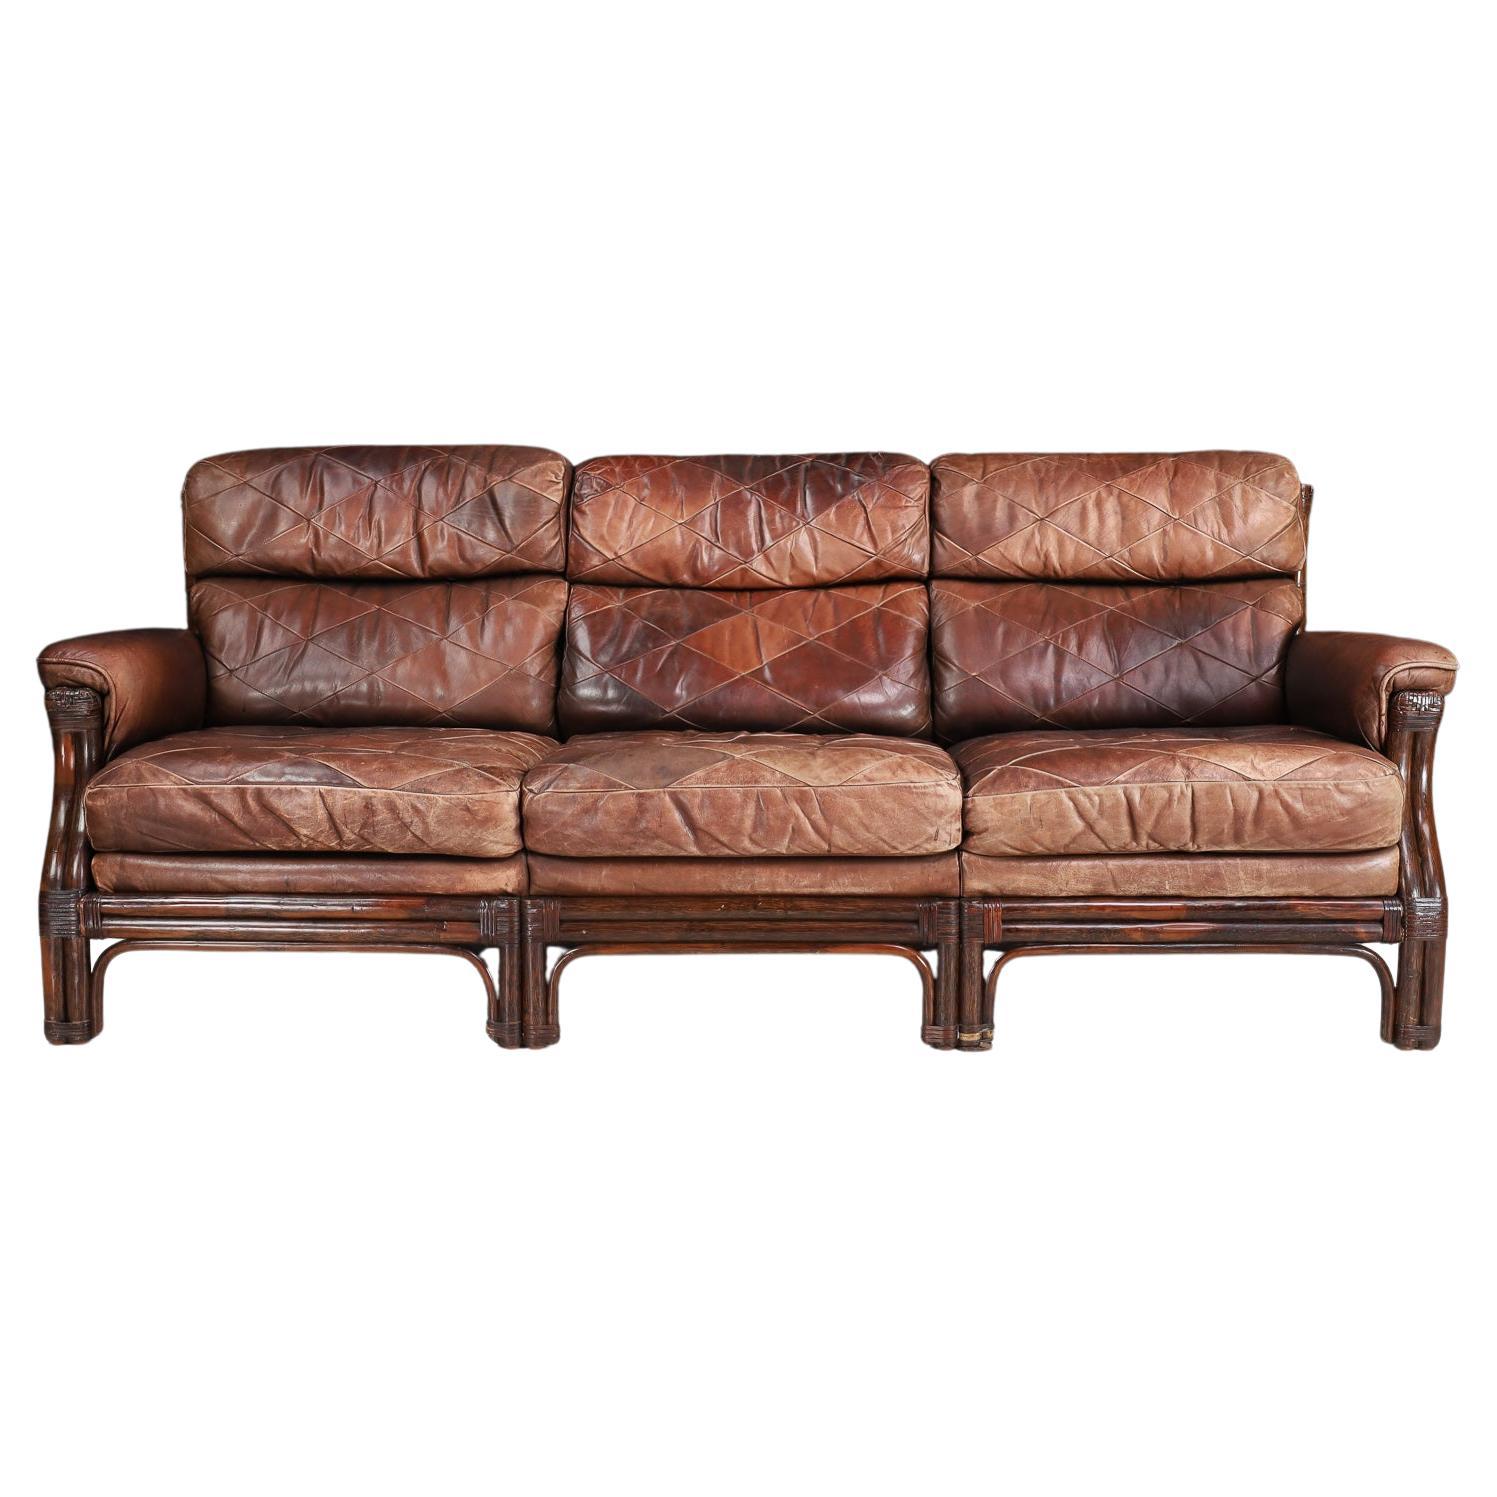 Mid-Century Modern Bamboo and Leather Sofa, France, 1970s For Sale